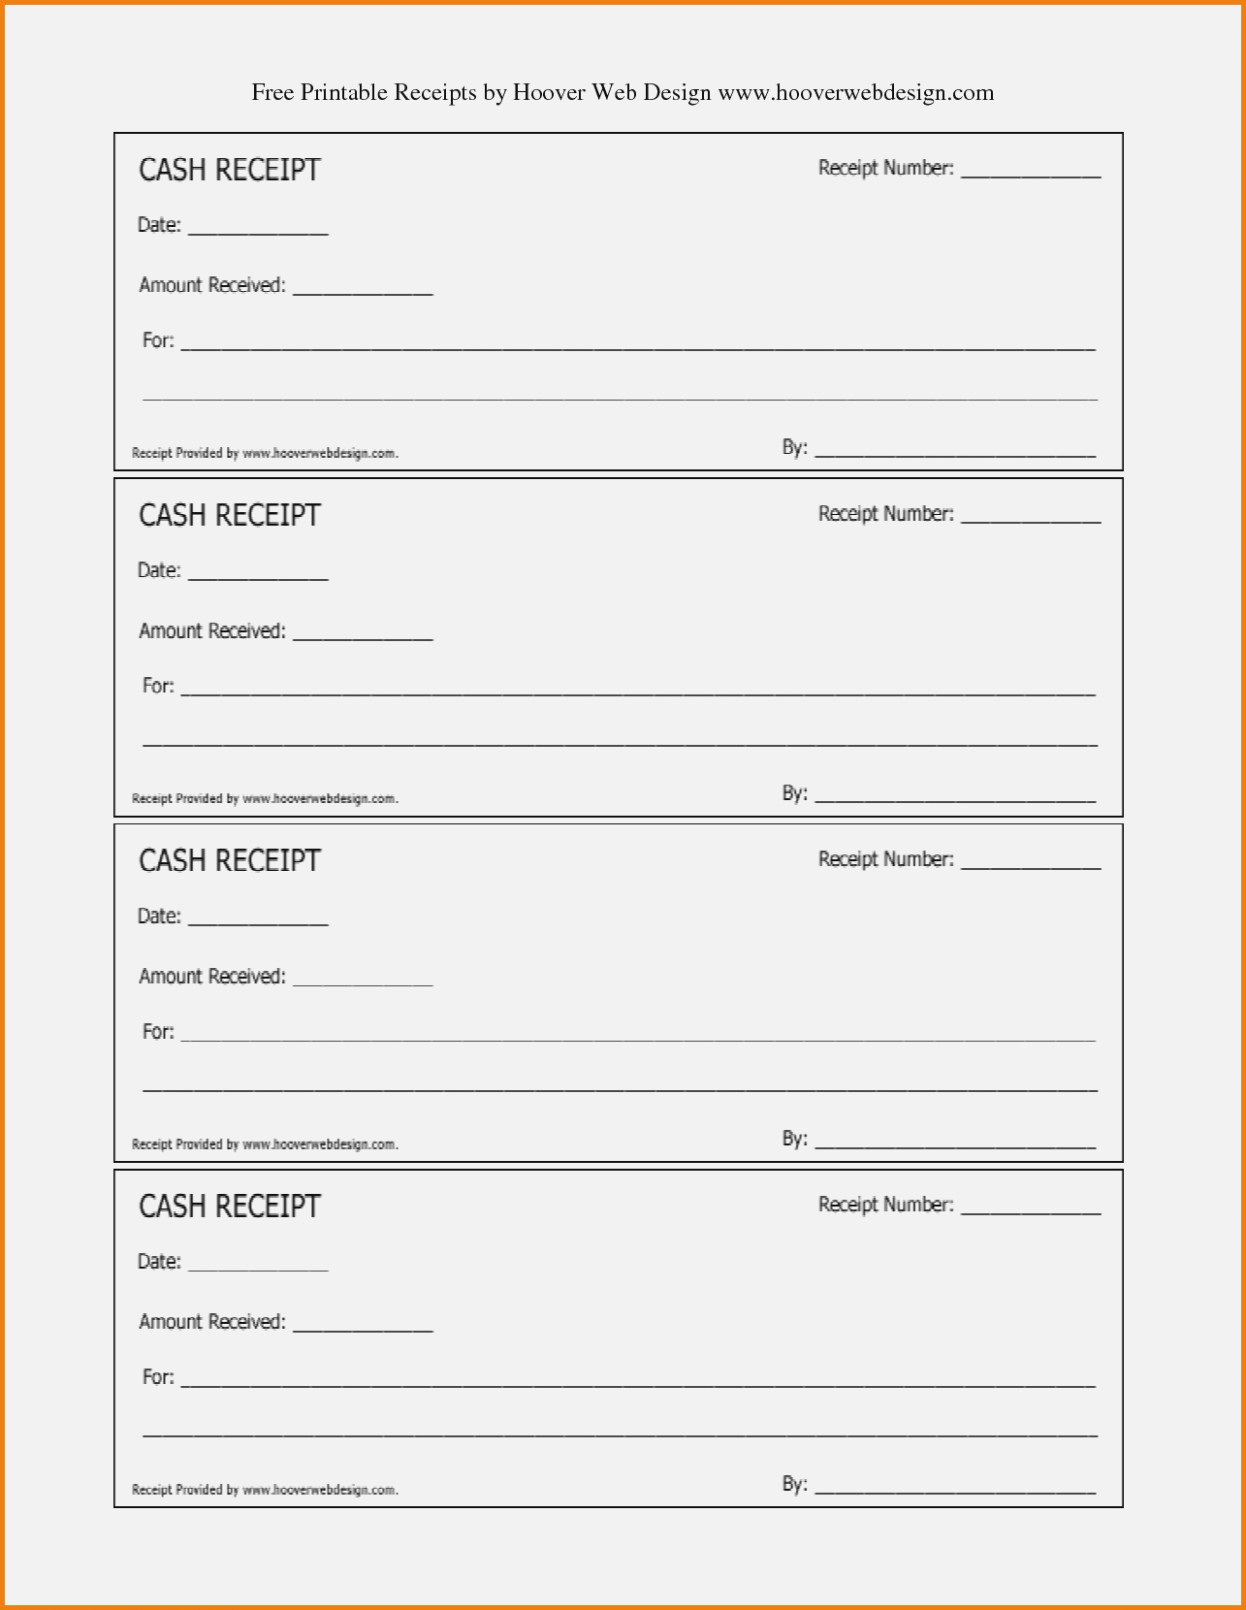 Printable Invoice Receipts | Template Business PSD, Excel, Word, PDF